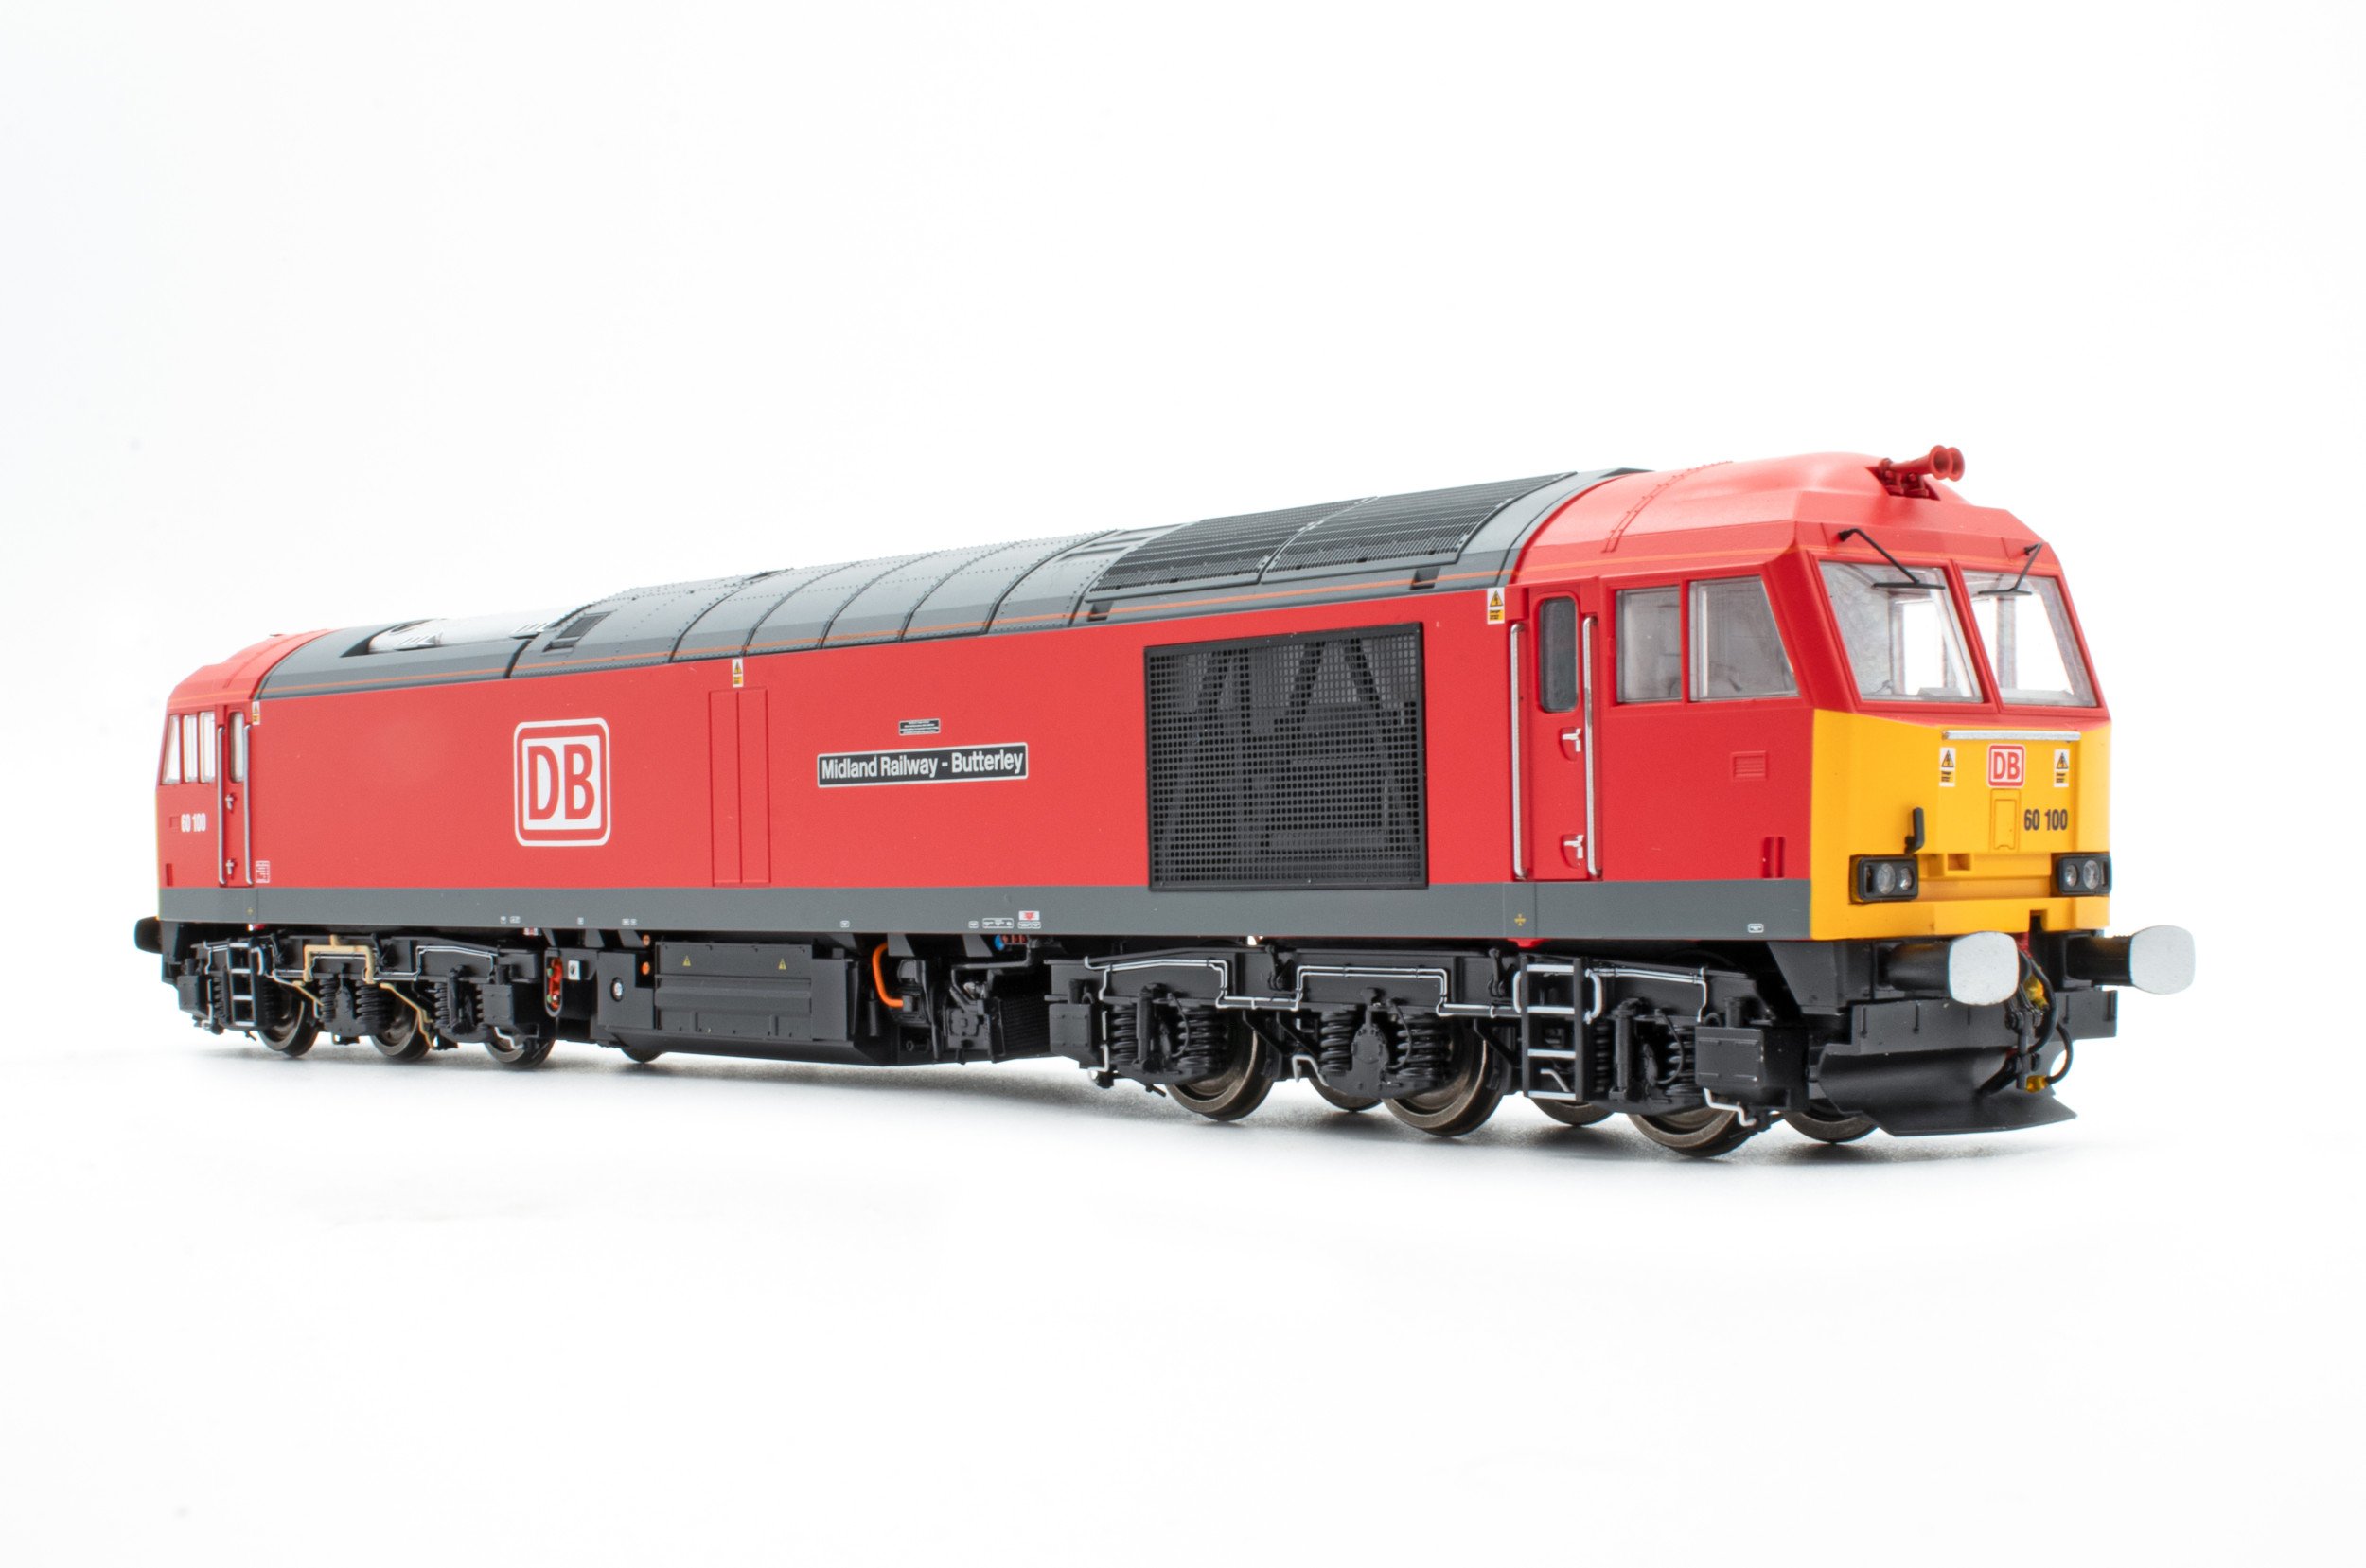 Accurascale is modelling 60100 as it appears today in DB Cargo red.